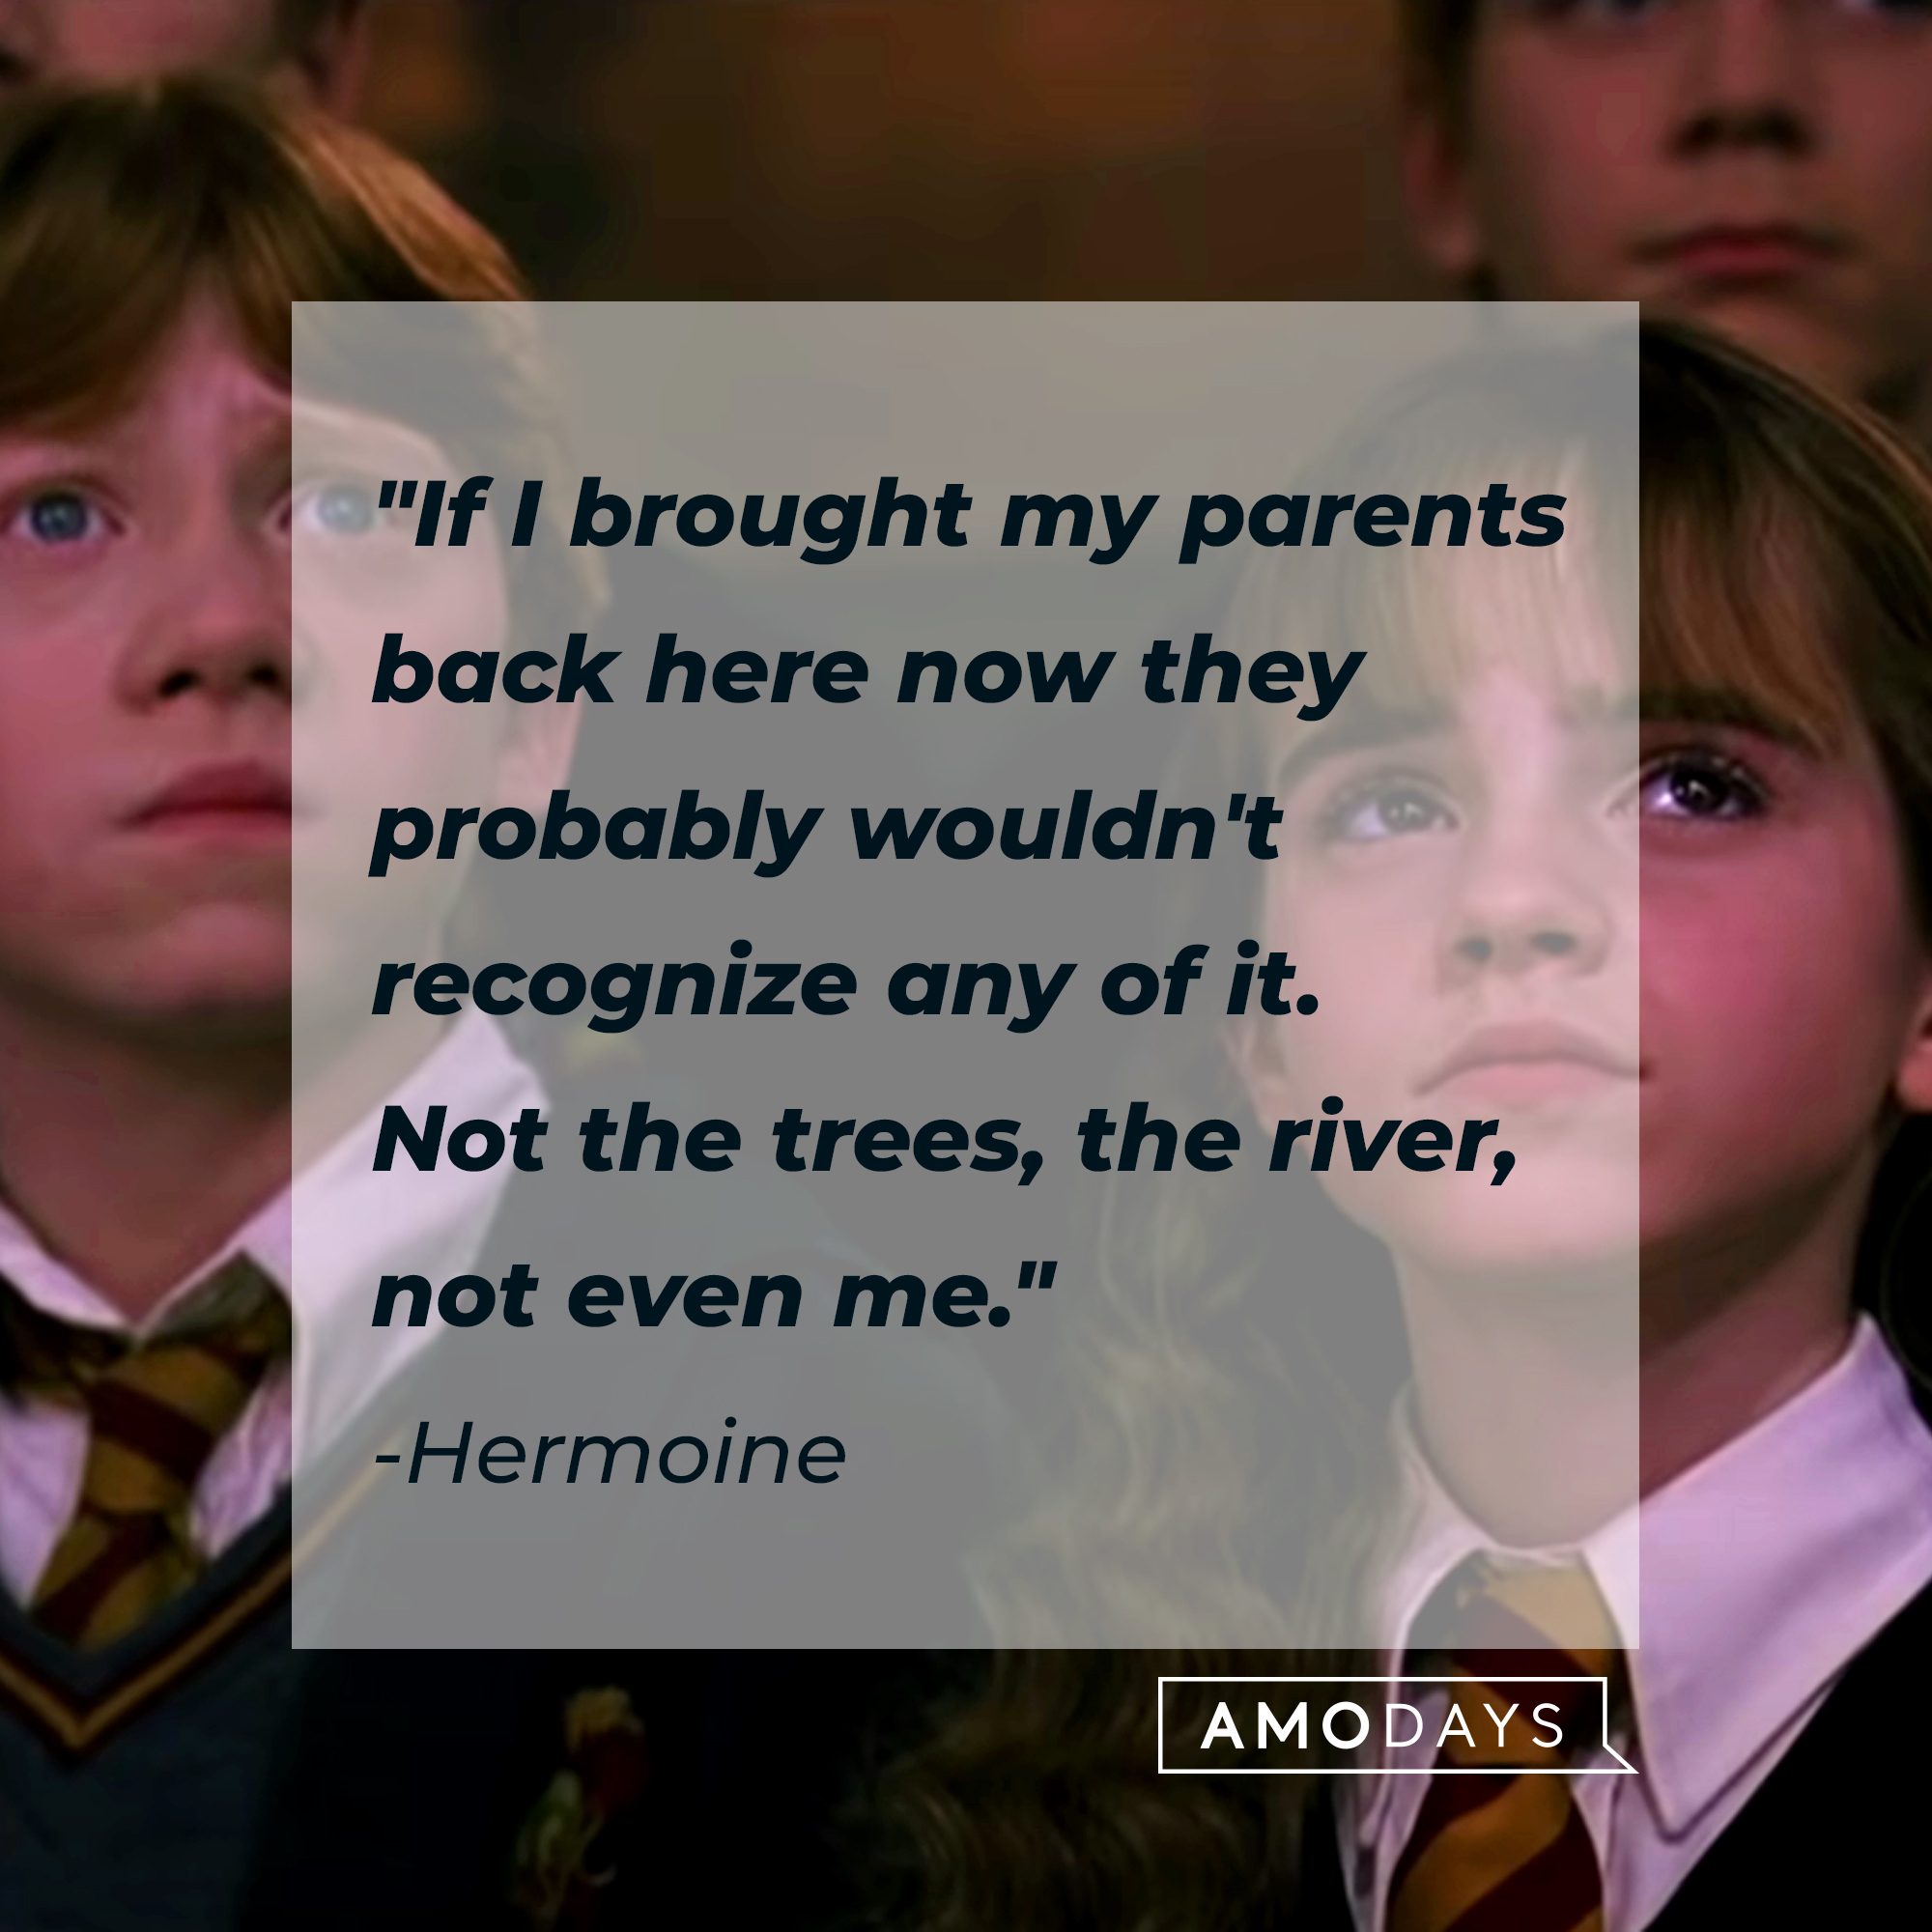 A photo of young Ron and Hermoine with Hermoine's quote, "If I brought my parents back here now they probably wouldn't recognize any of it. Not the trees, the river, not even me." | Source: YouTube/harrypotter